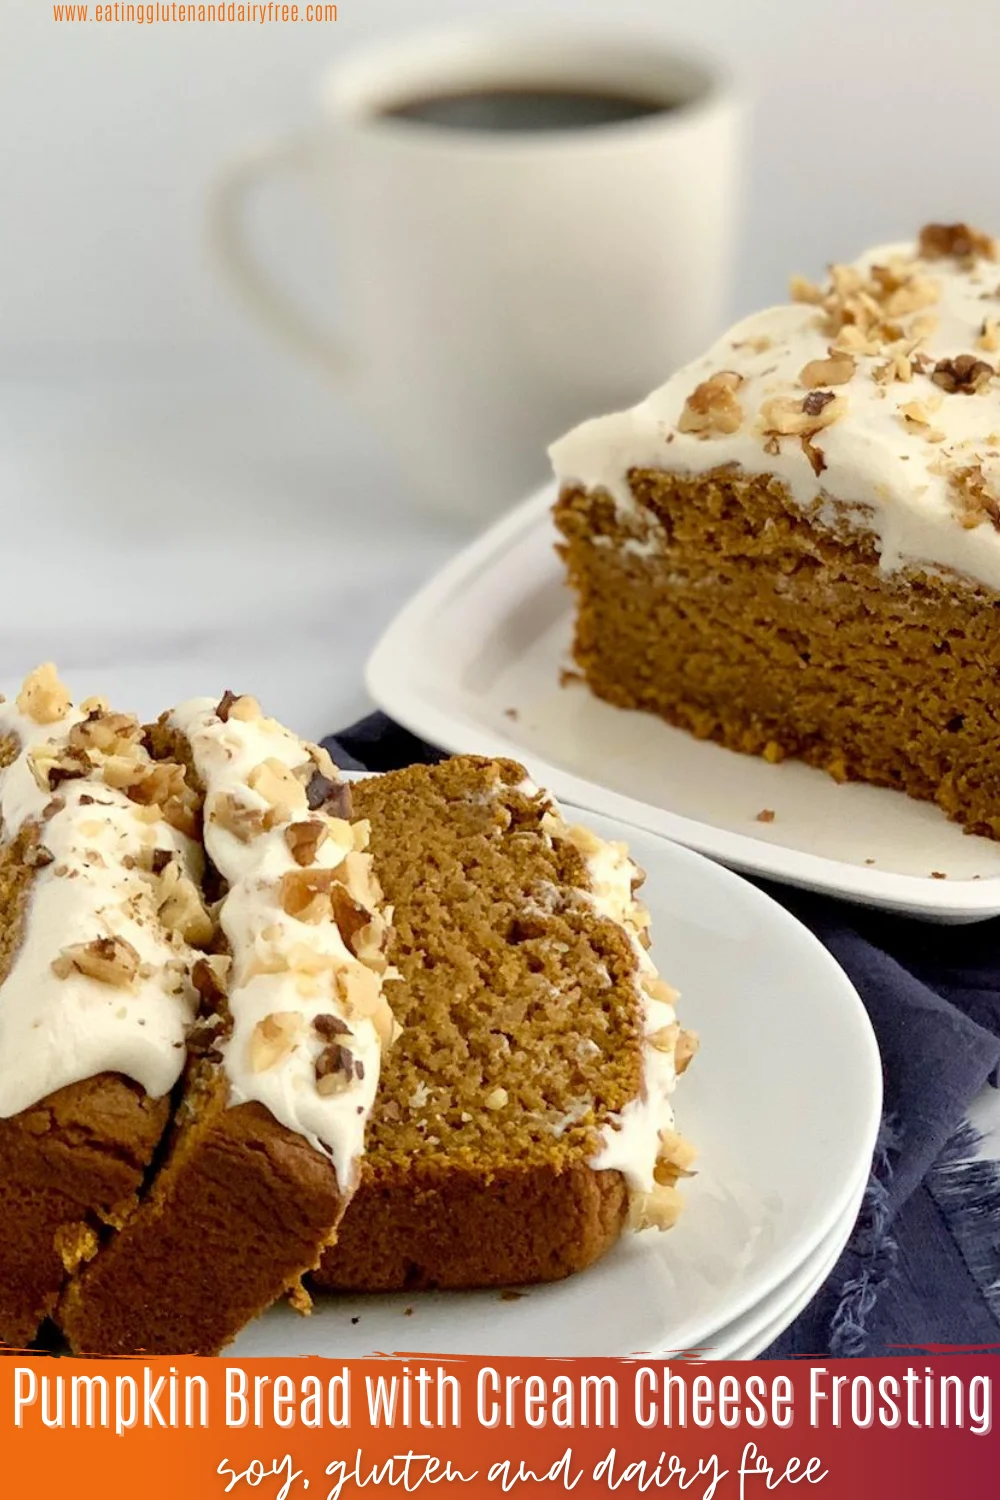 3 slices of pumpkin bread with cream cheese frosting and chopped nuts.